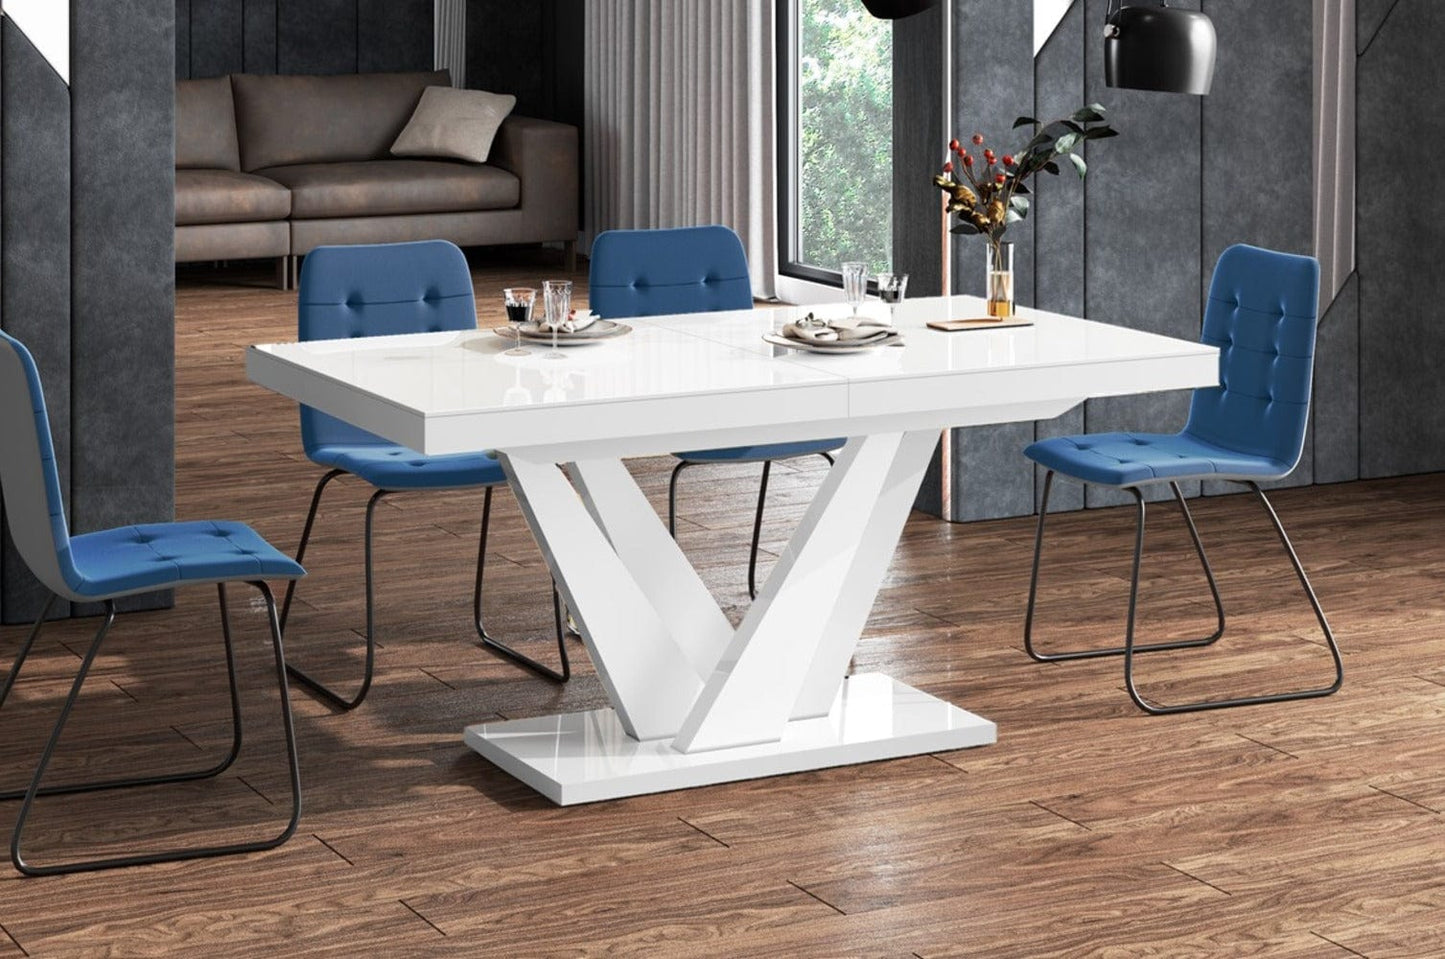 Dining Set CHARA 7 pcs. white modern glossy Dining Table with 2 self-starting leaves plus 6 chairs